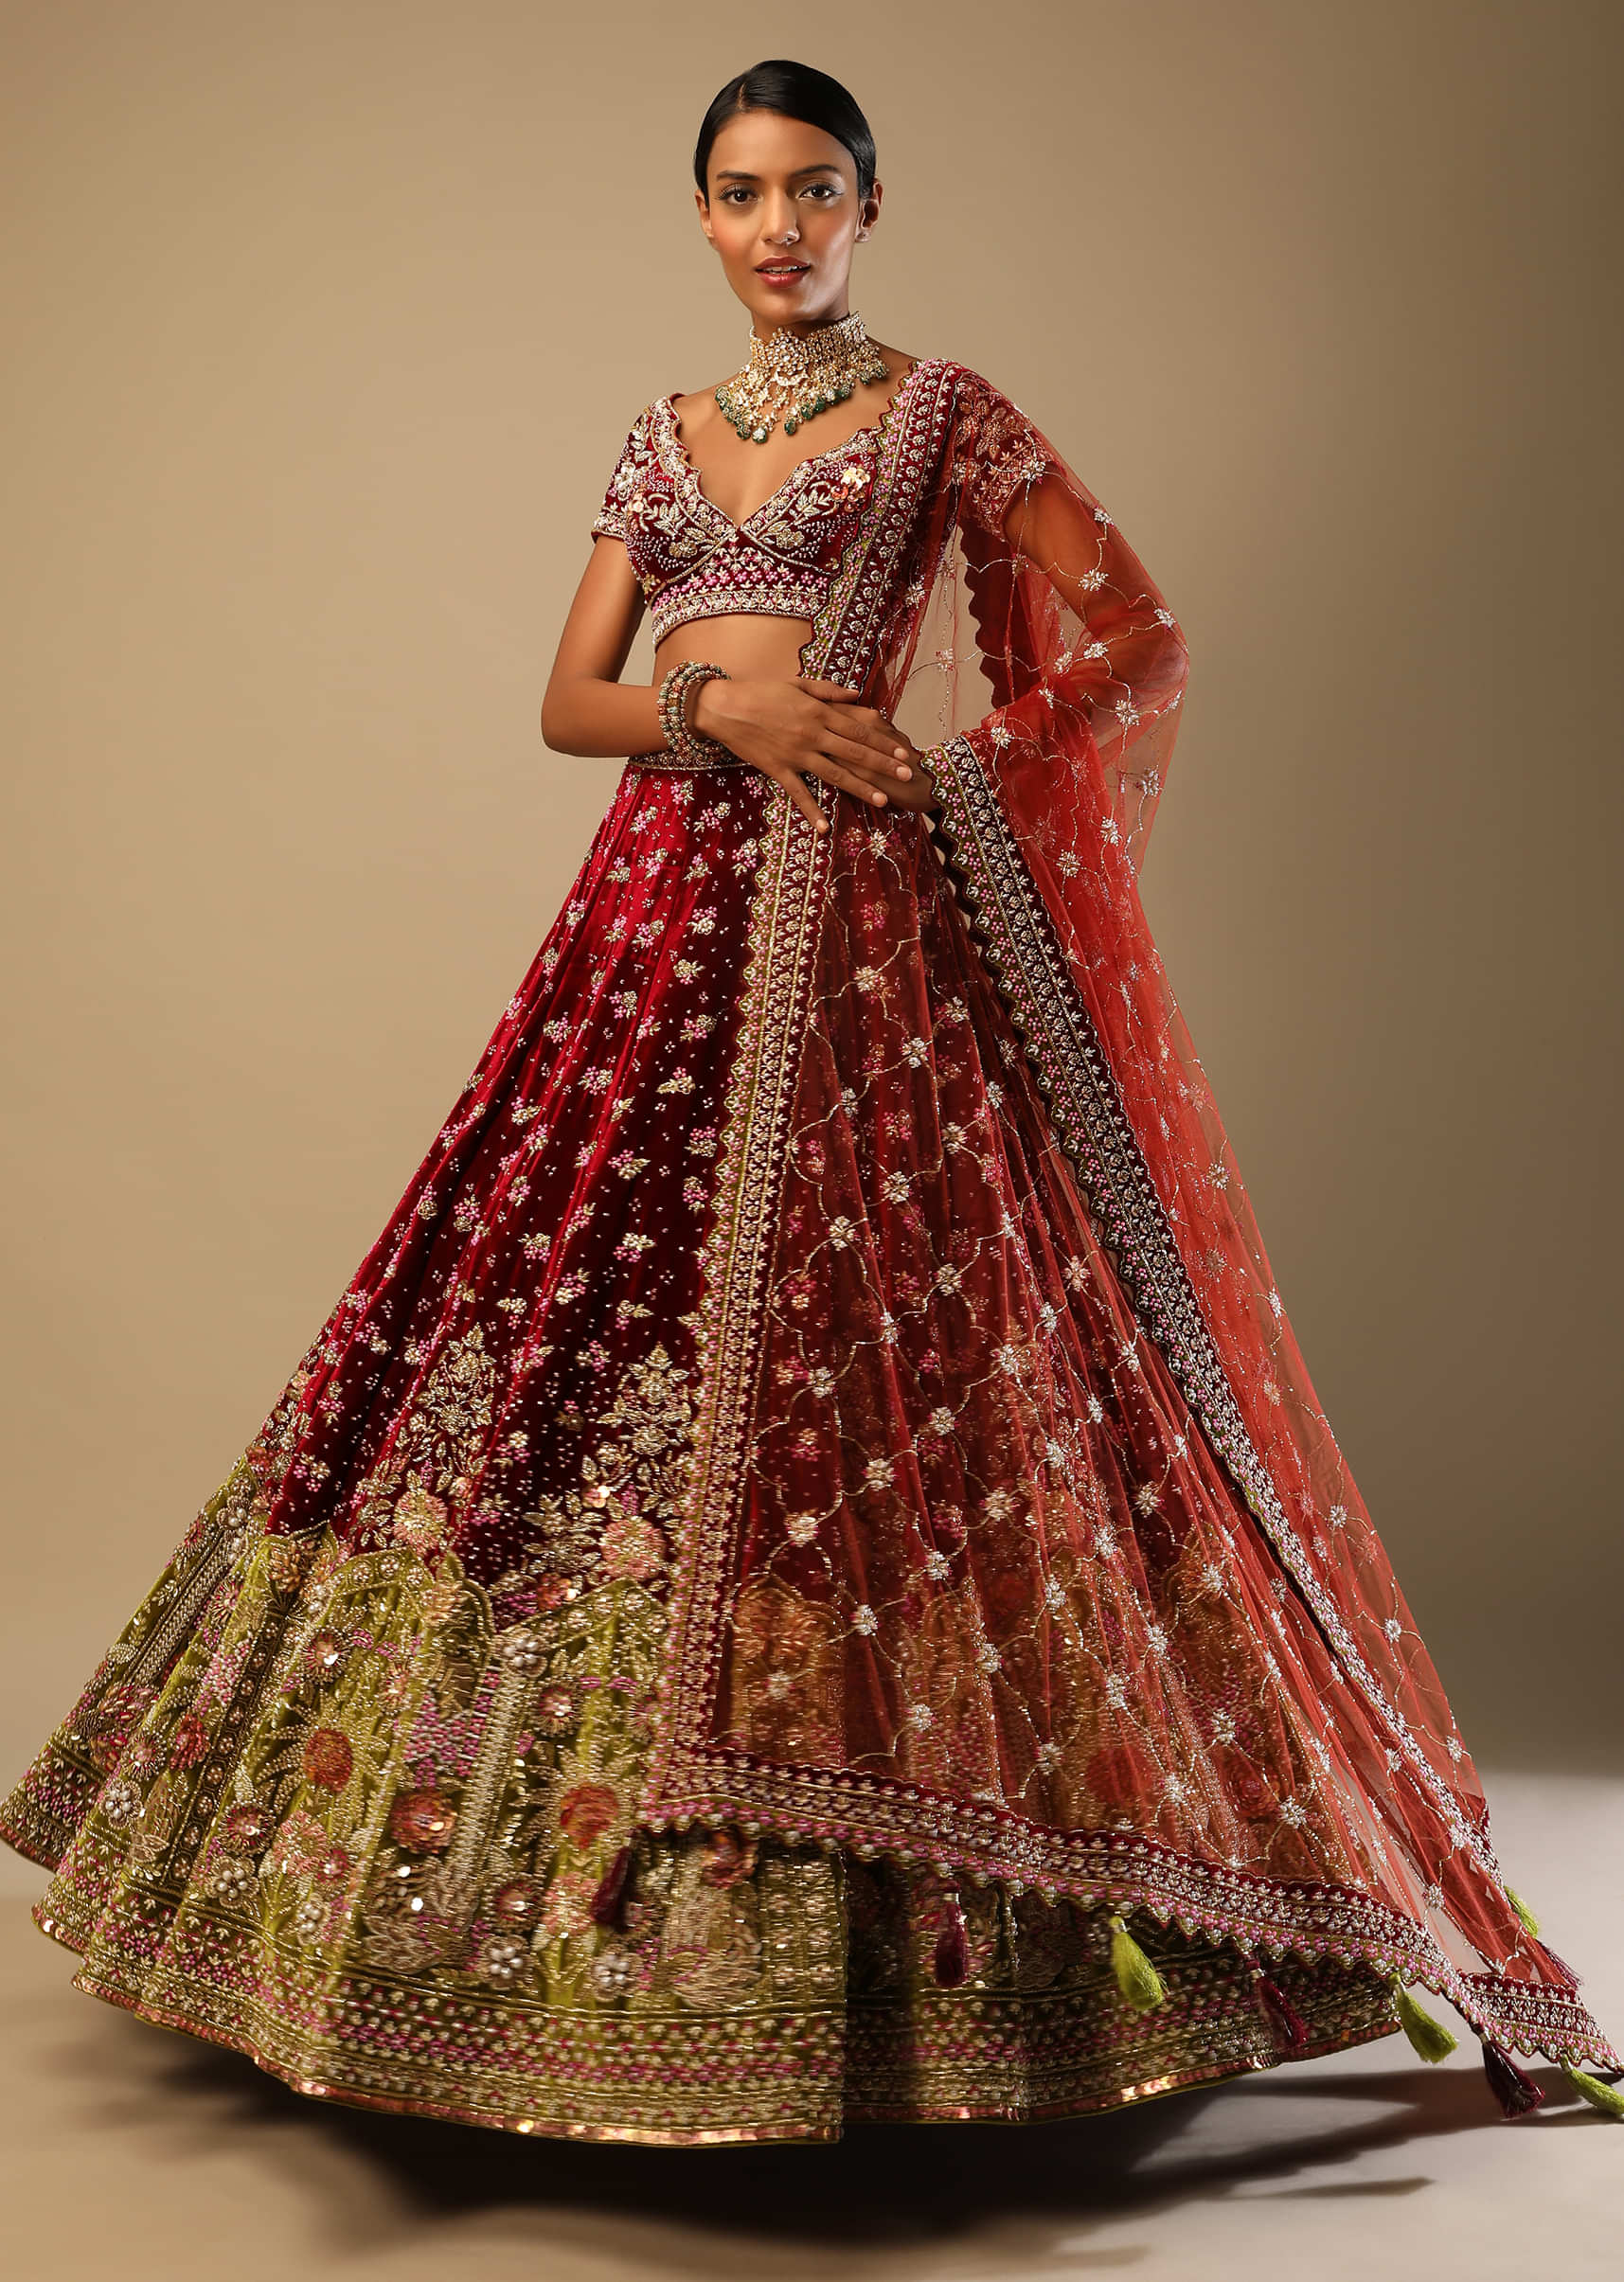 Persian Red Lehenga Choli In Velvet With Moss Green Mughal Border And Multi Colored Hand Embroidered Flowers 